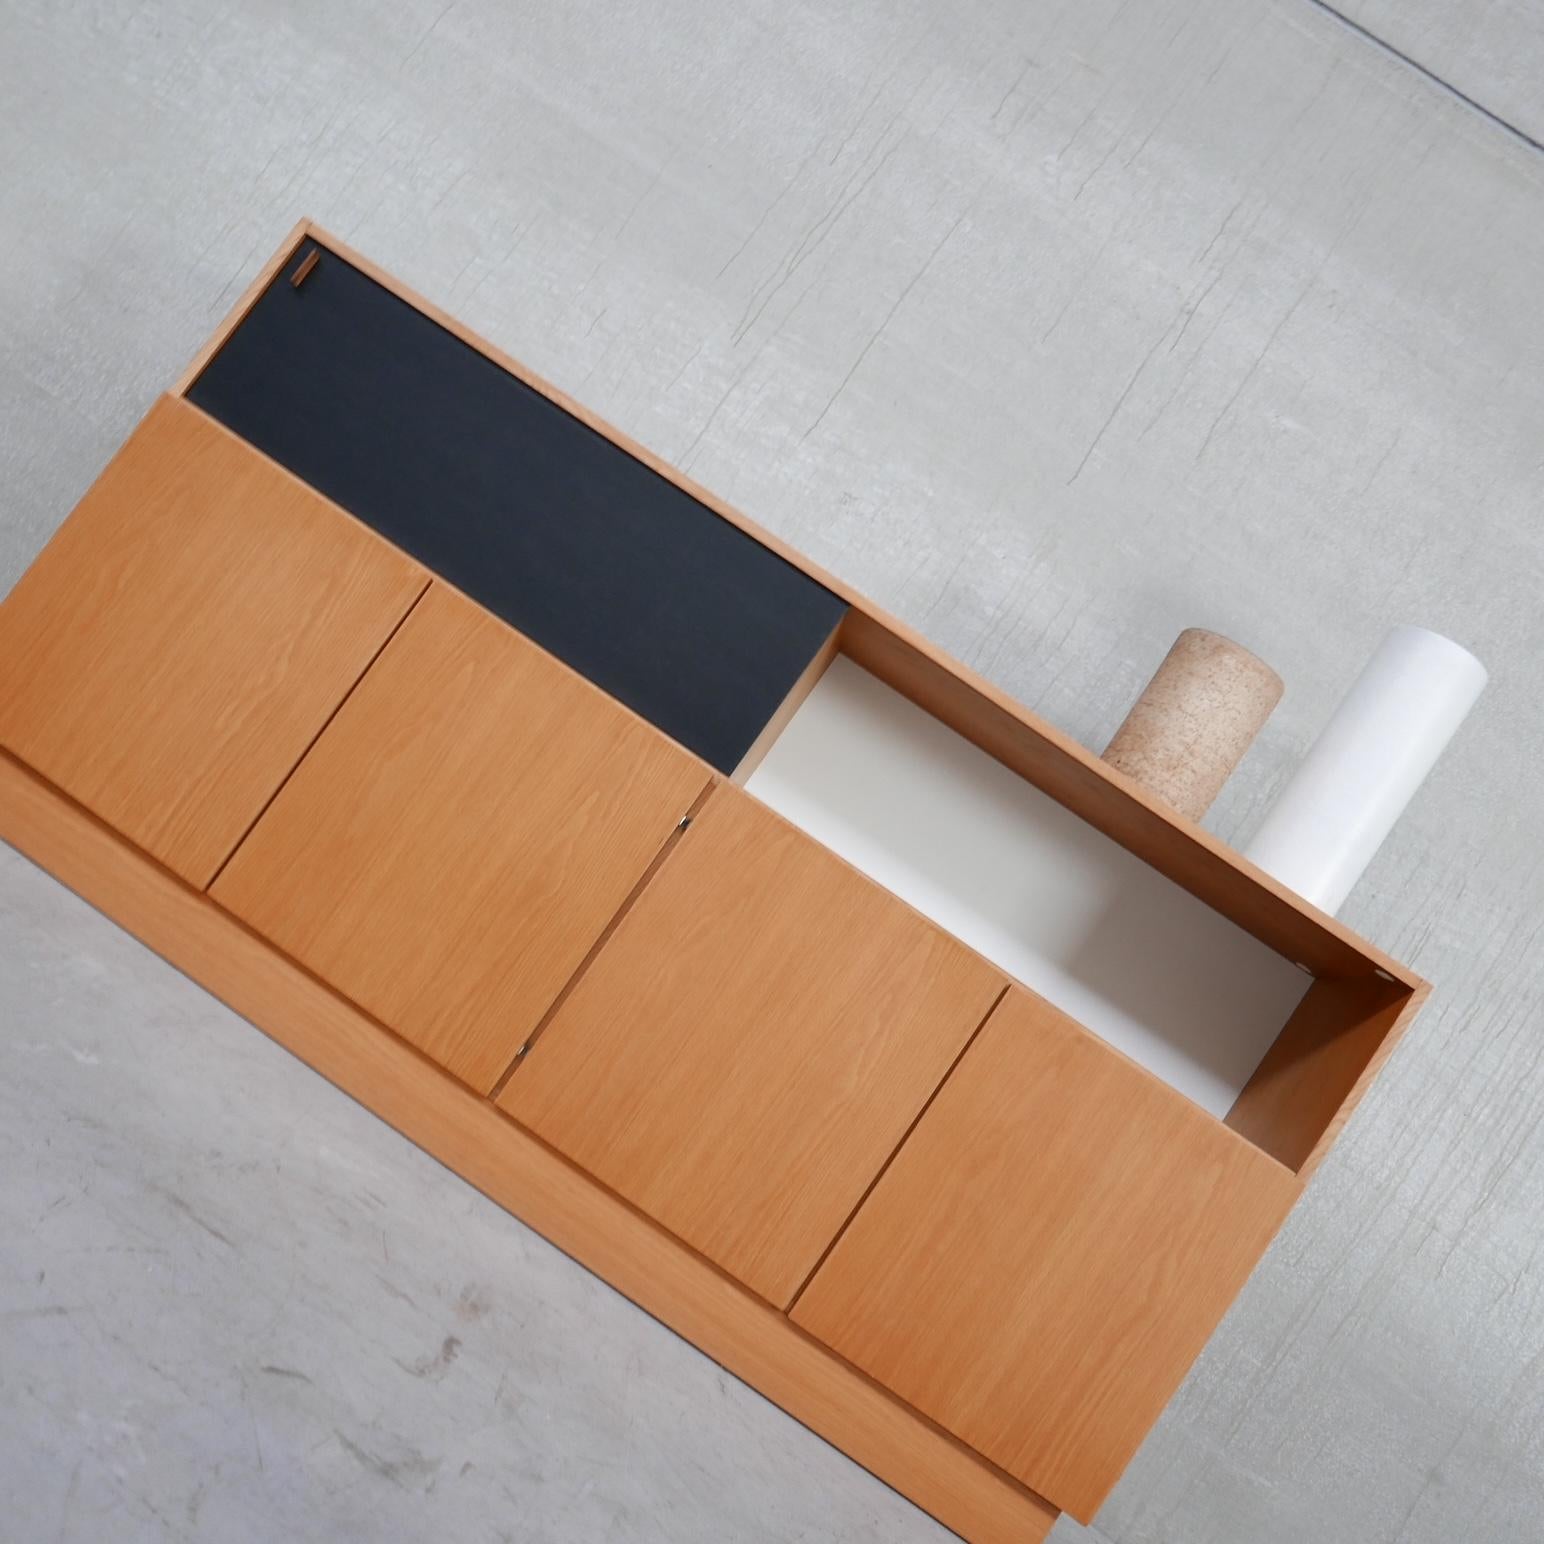 A modernist sideboard by De Coene. 

Four cabinet doors sit over an open alcove above, which has a sliding black door so one alcove remains open or covered. 

The sliding door has a leather tag pull. 

Belgium, c1970s. 

Generally good